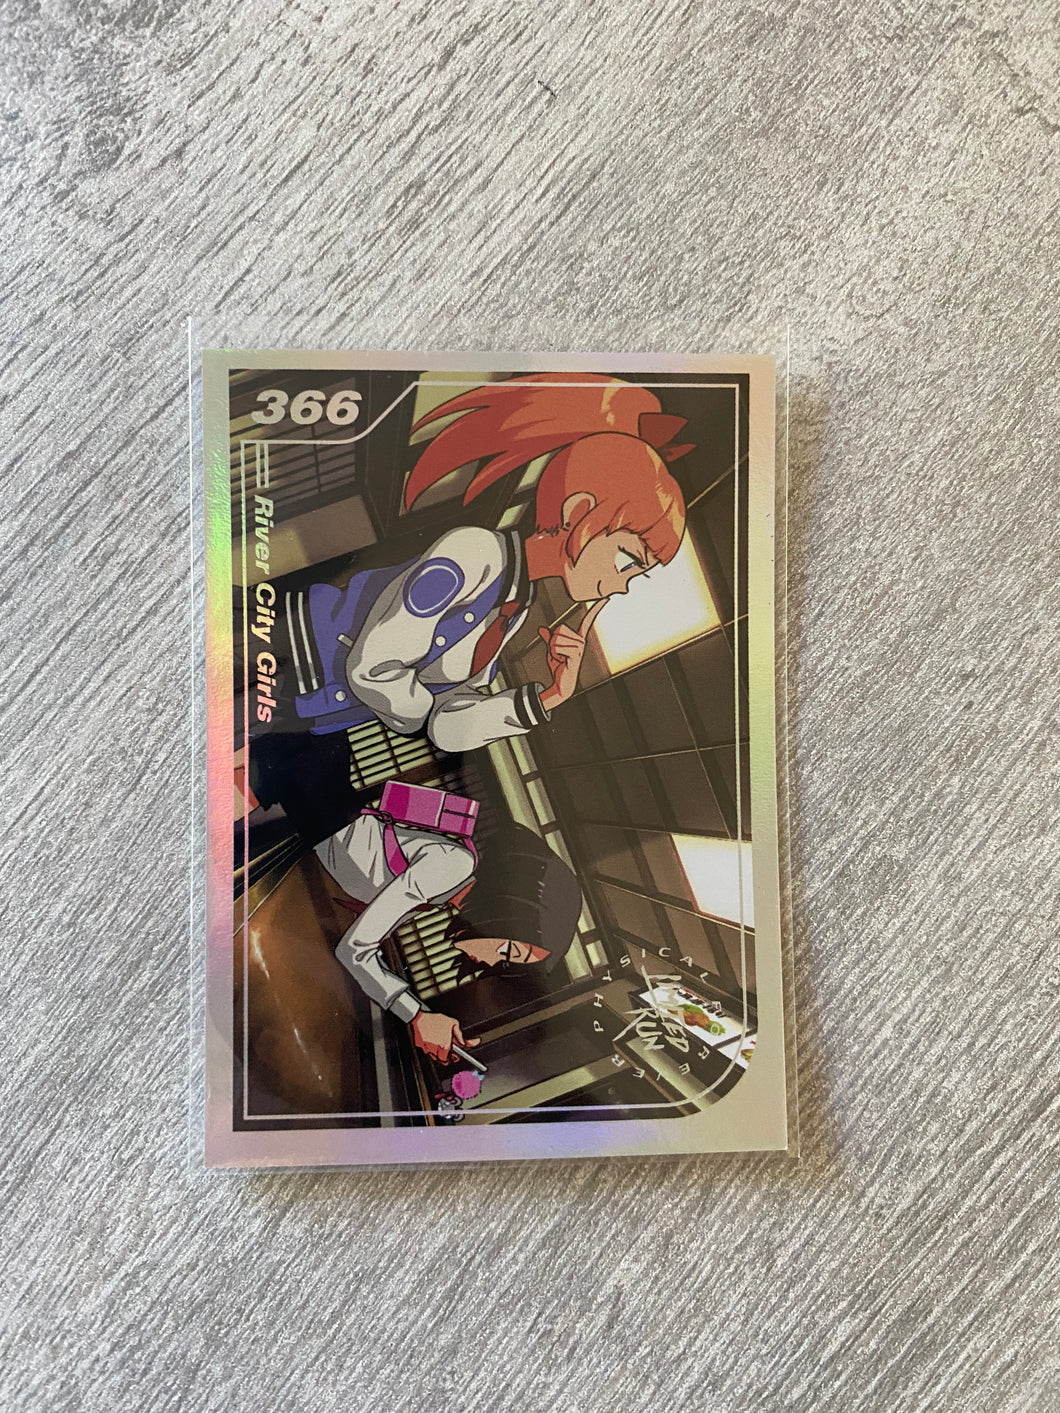 Gen2 #366 Silver River city girls Limited run games Trading card